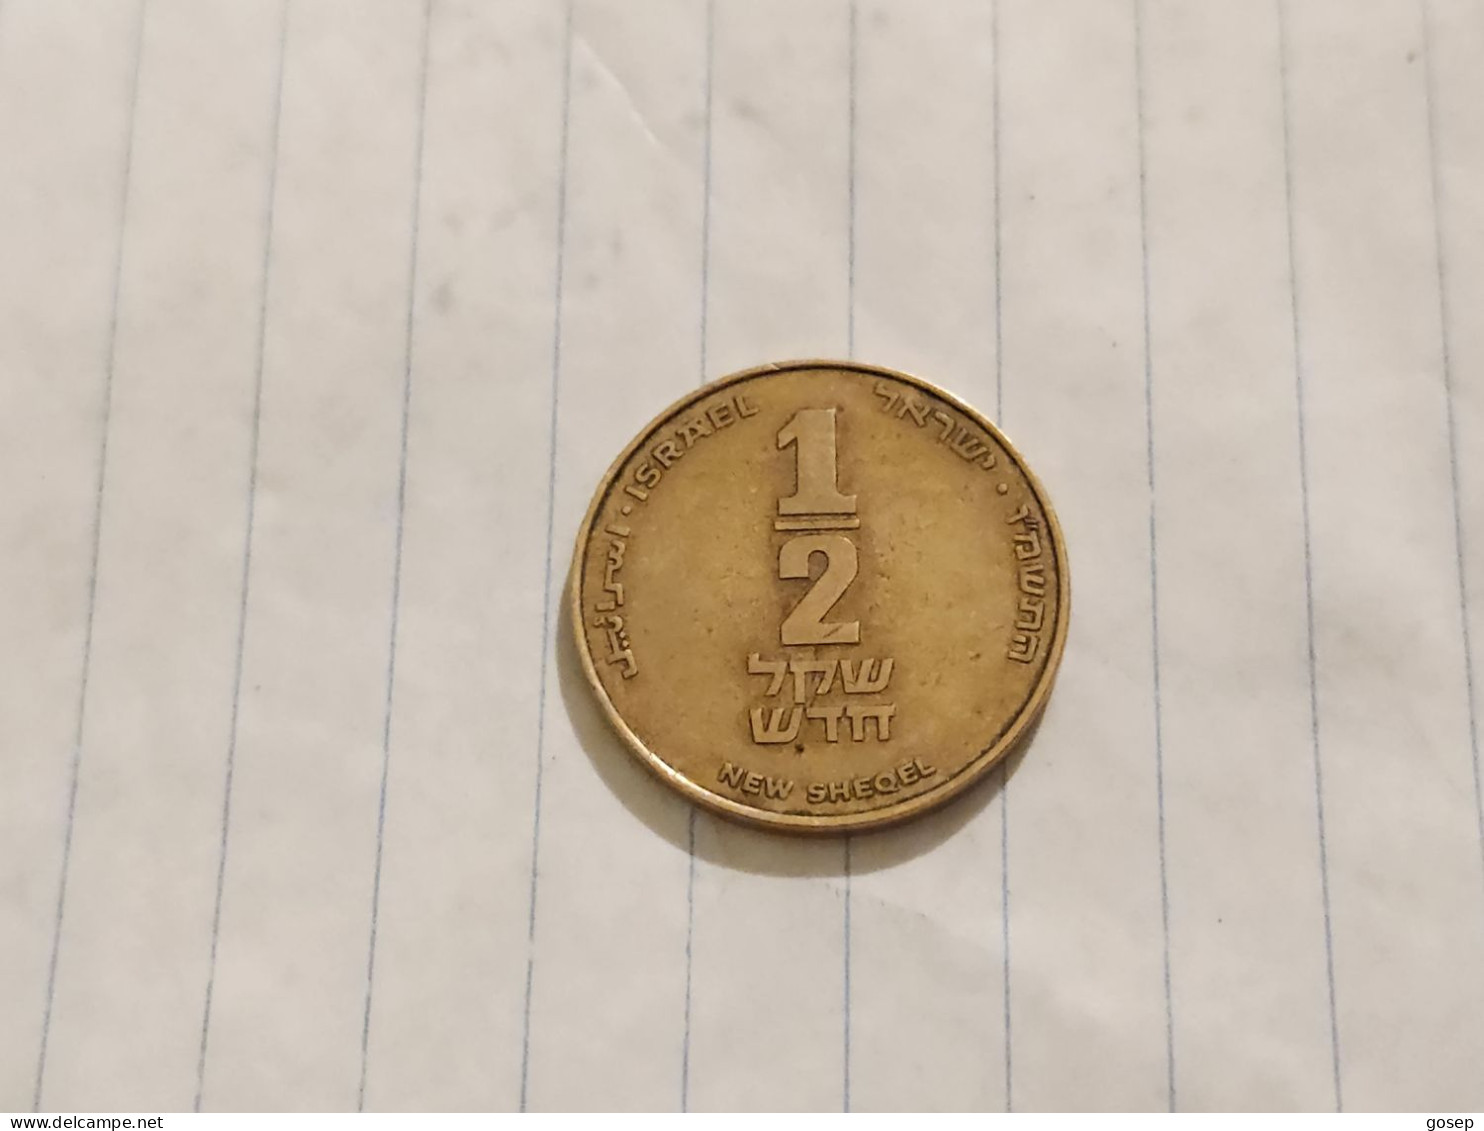 Israel-Coins-JEWISH LEDAERS(SHEKEL1985-1981)1/2 NIS-(41a)-(1986)(51)תשמ"ו(Special Domestic Currency-ROTHSCHILD)-copper - Israel